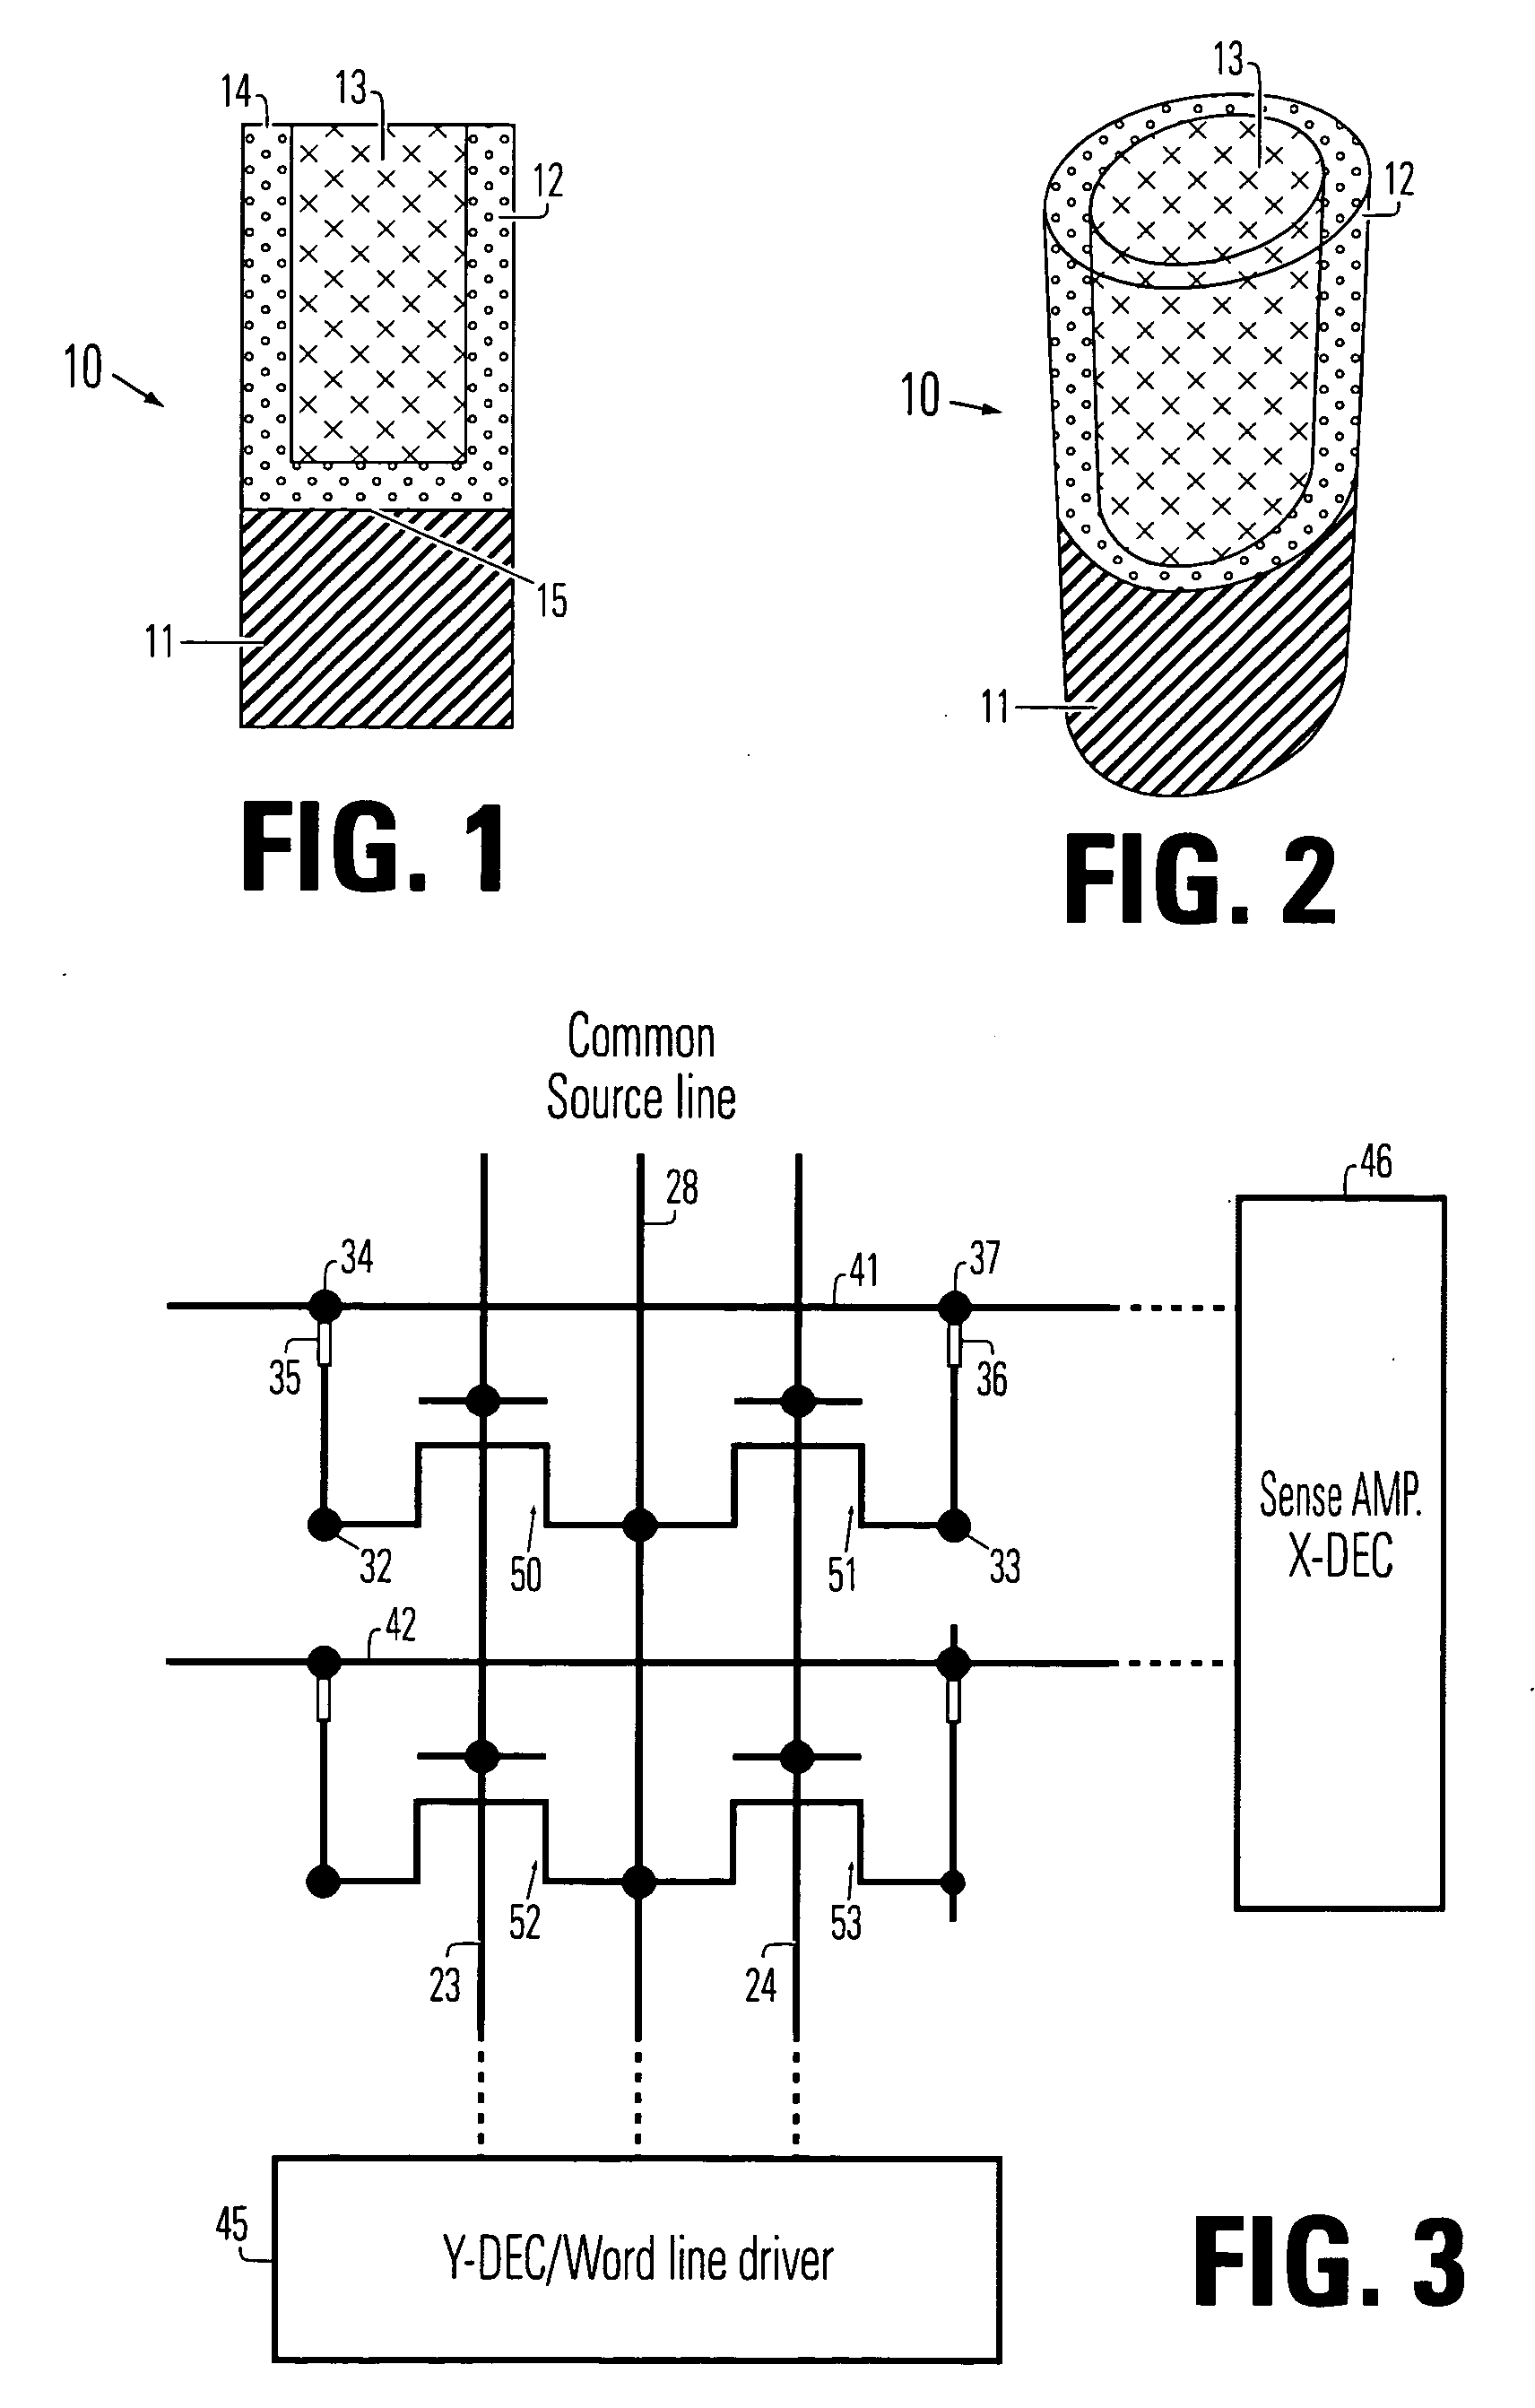 Method of manufacturing a pipe shaped phase change memory